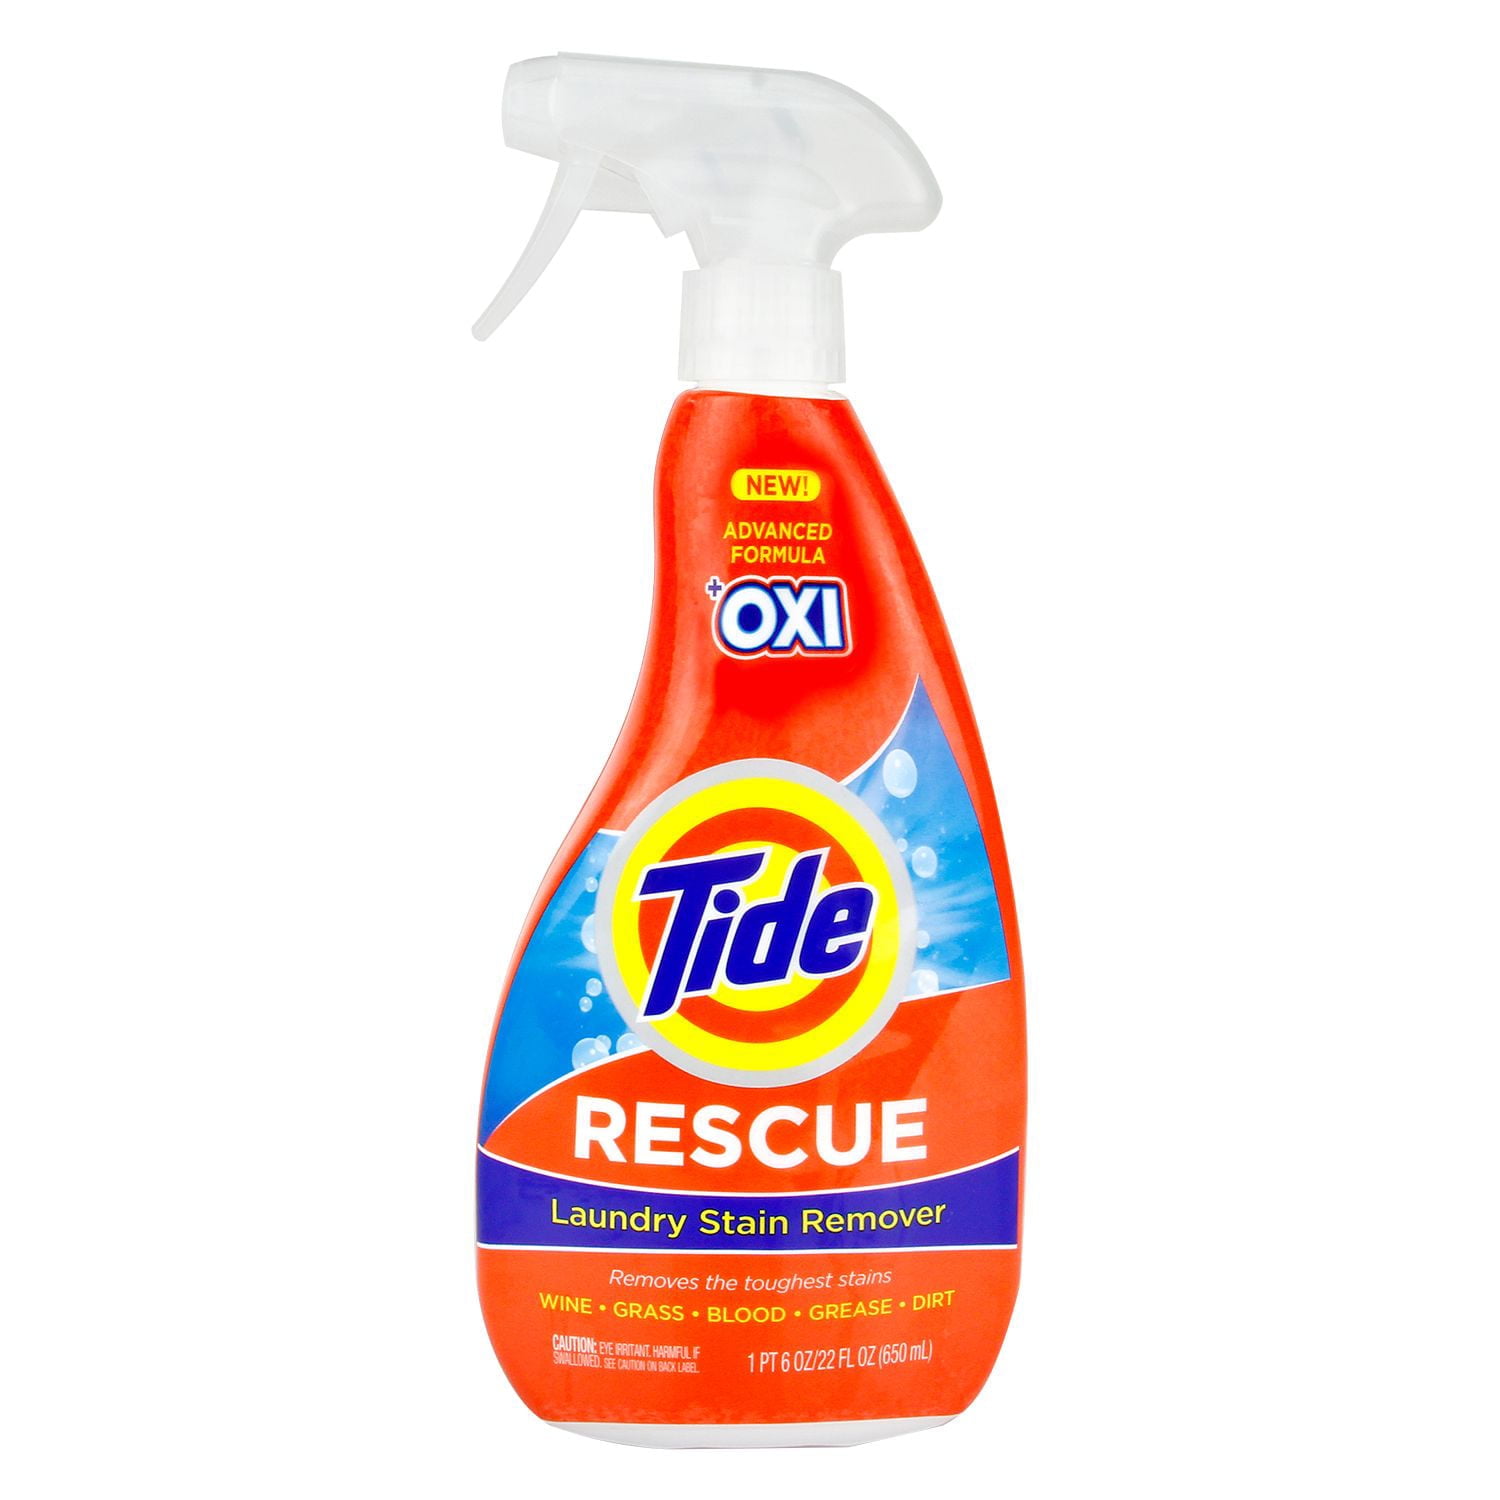 Tide Rescue + Oxi Spray and Wash Laundry and Carpet Cleaning Stain Remover, 22 fl oz